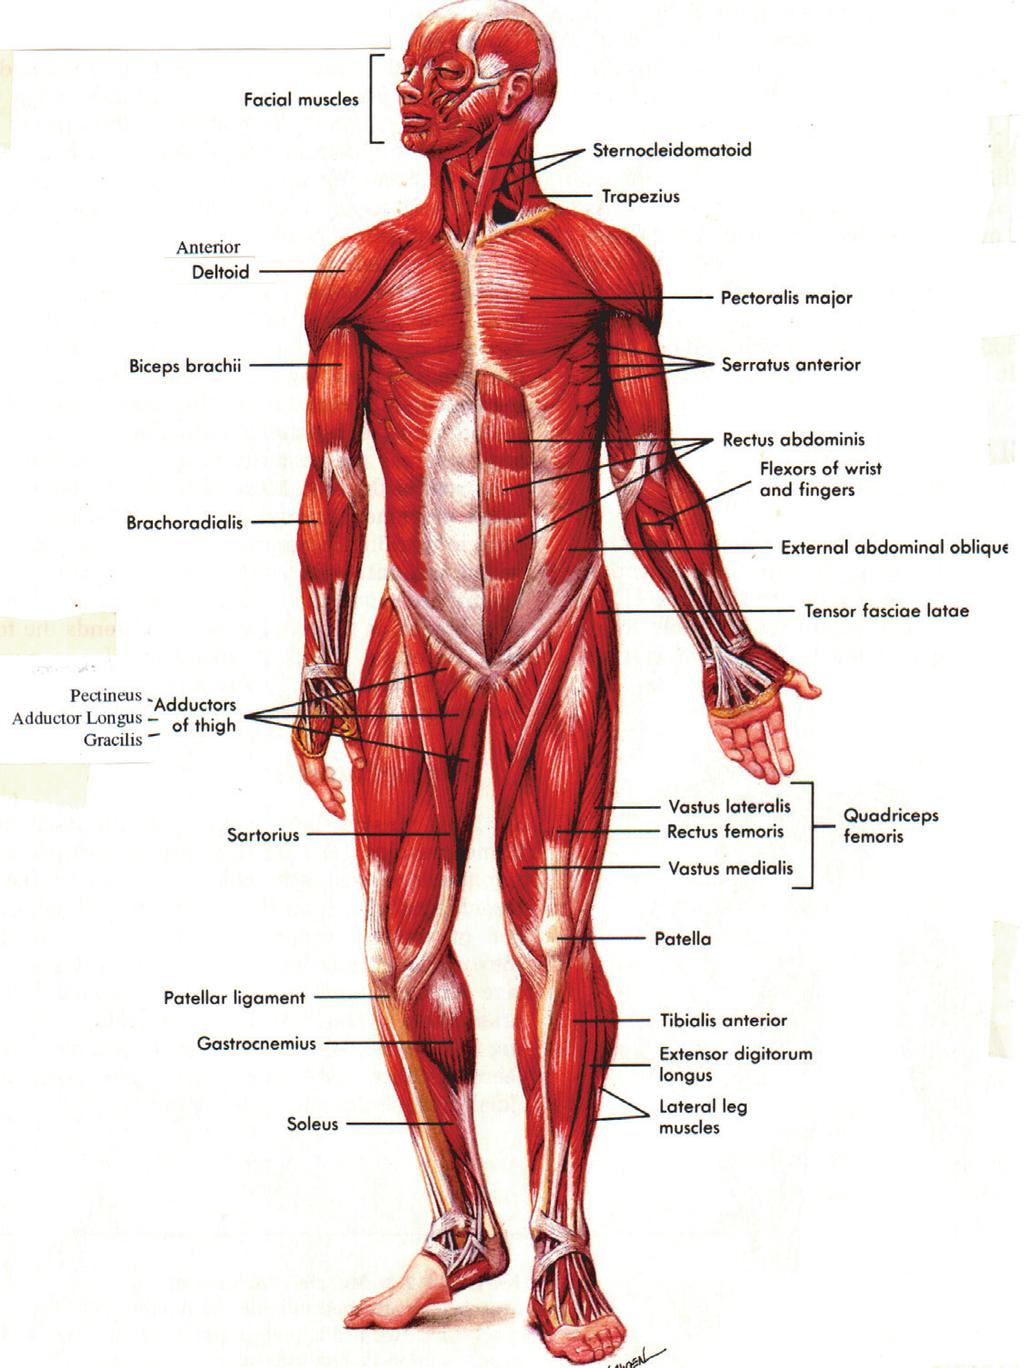 Most movements that occur in physical activities are combinations of the movements explained in figure 3.7. Introductory anatomy of the muscular system Body muscles figure 3.